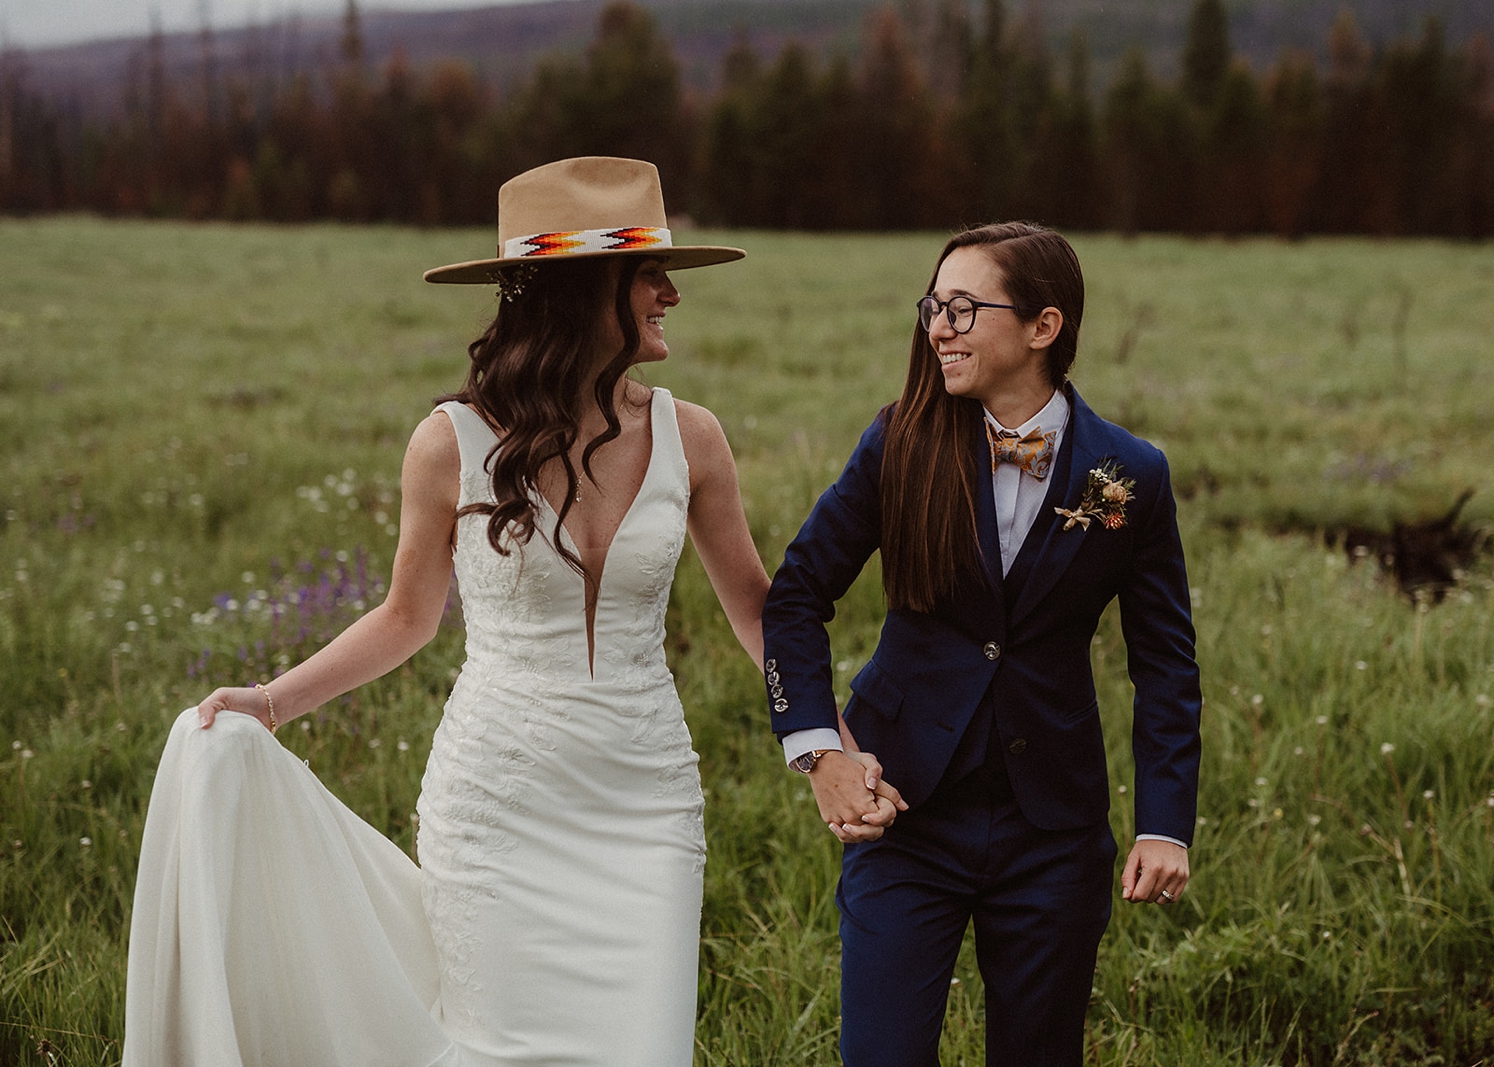 Couple holding hands and walking in field after ceremony at Colorado Airbnb wedding | McArthur Weddings and Events